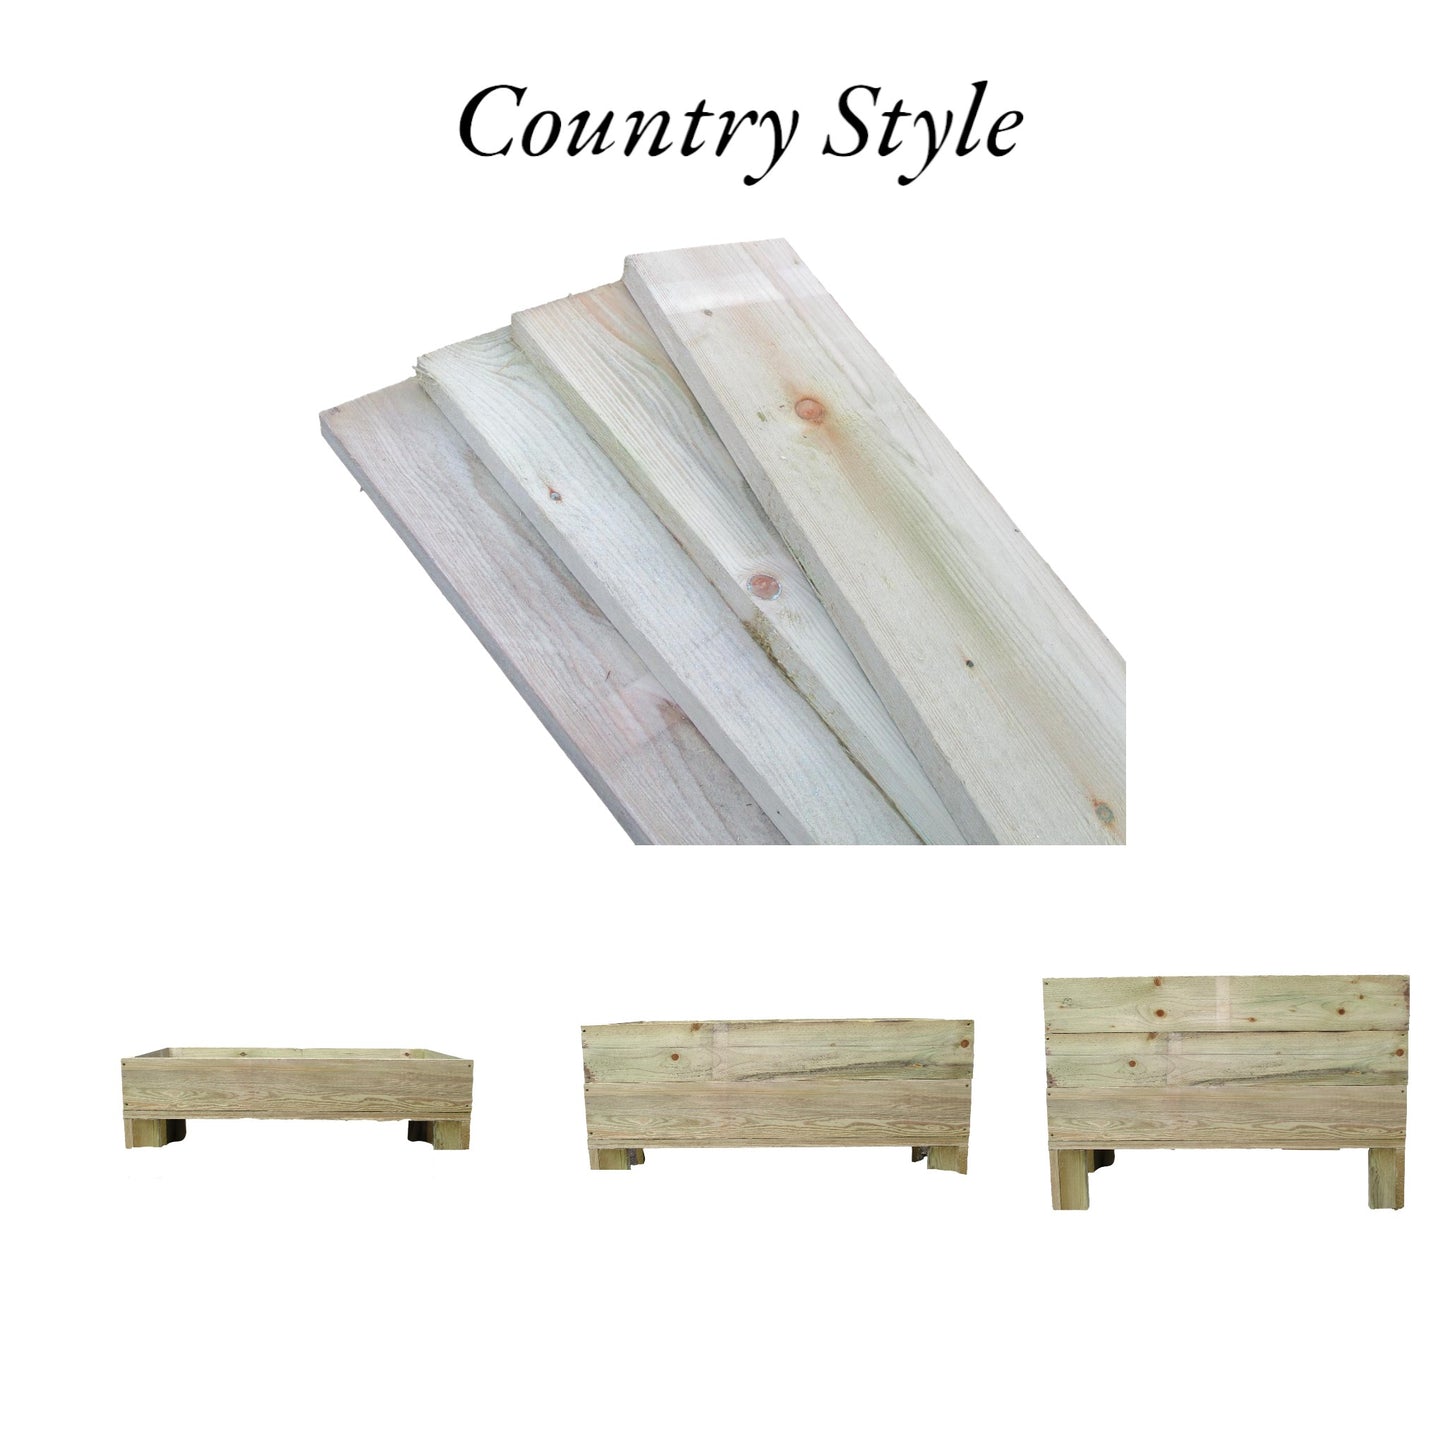 2M Long XL Decking / Smooth or Country Style - Garden Planters